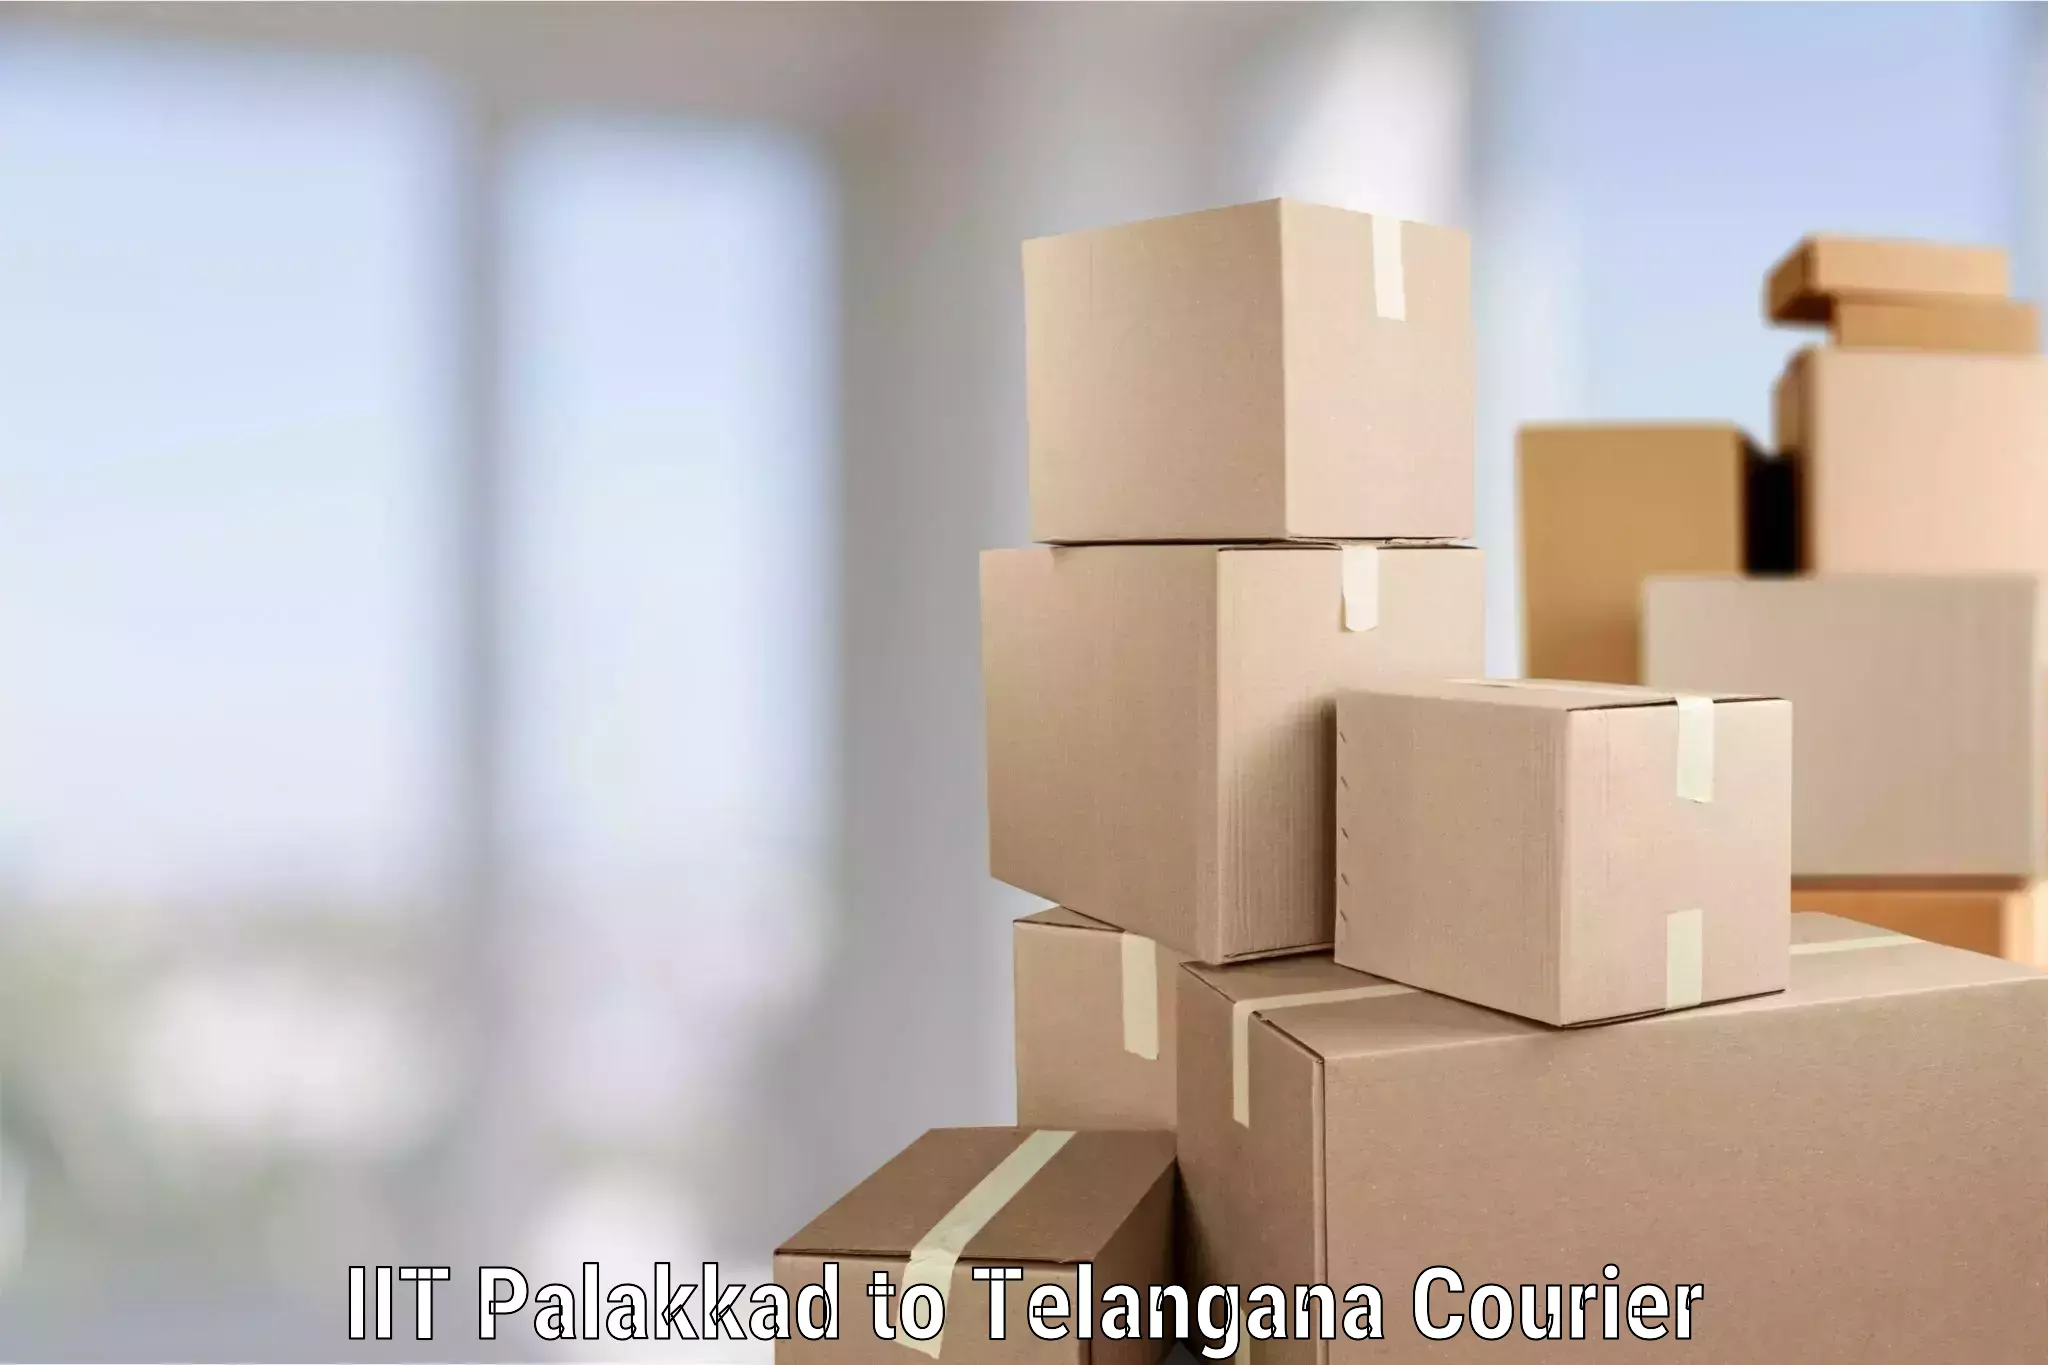 Professional movers and packers IIT Palakkad to Jannaram